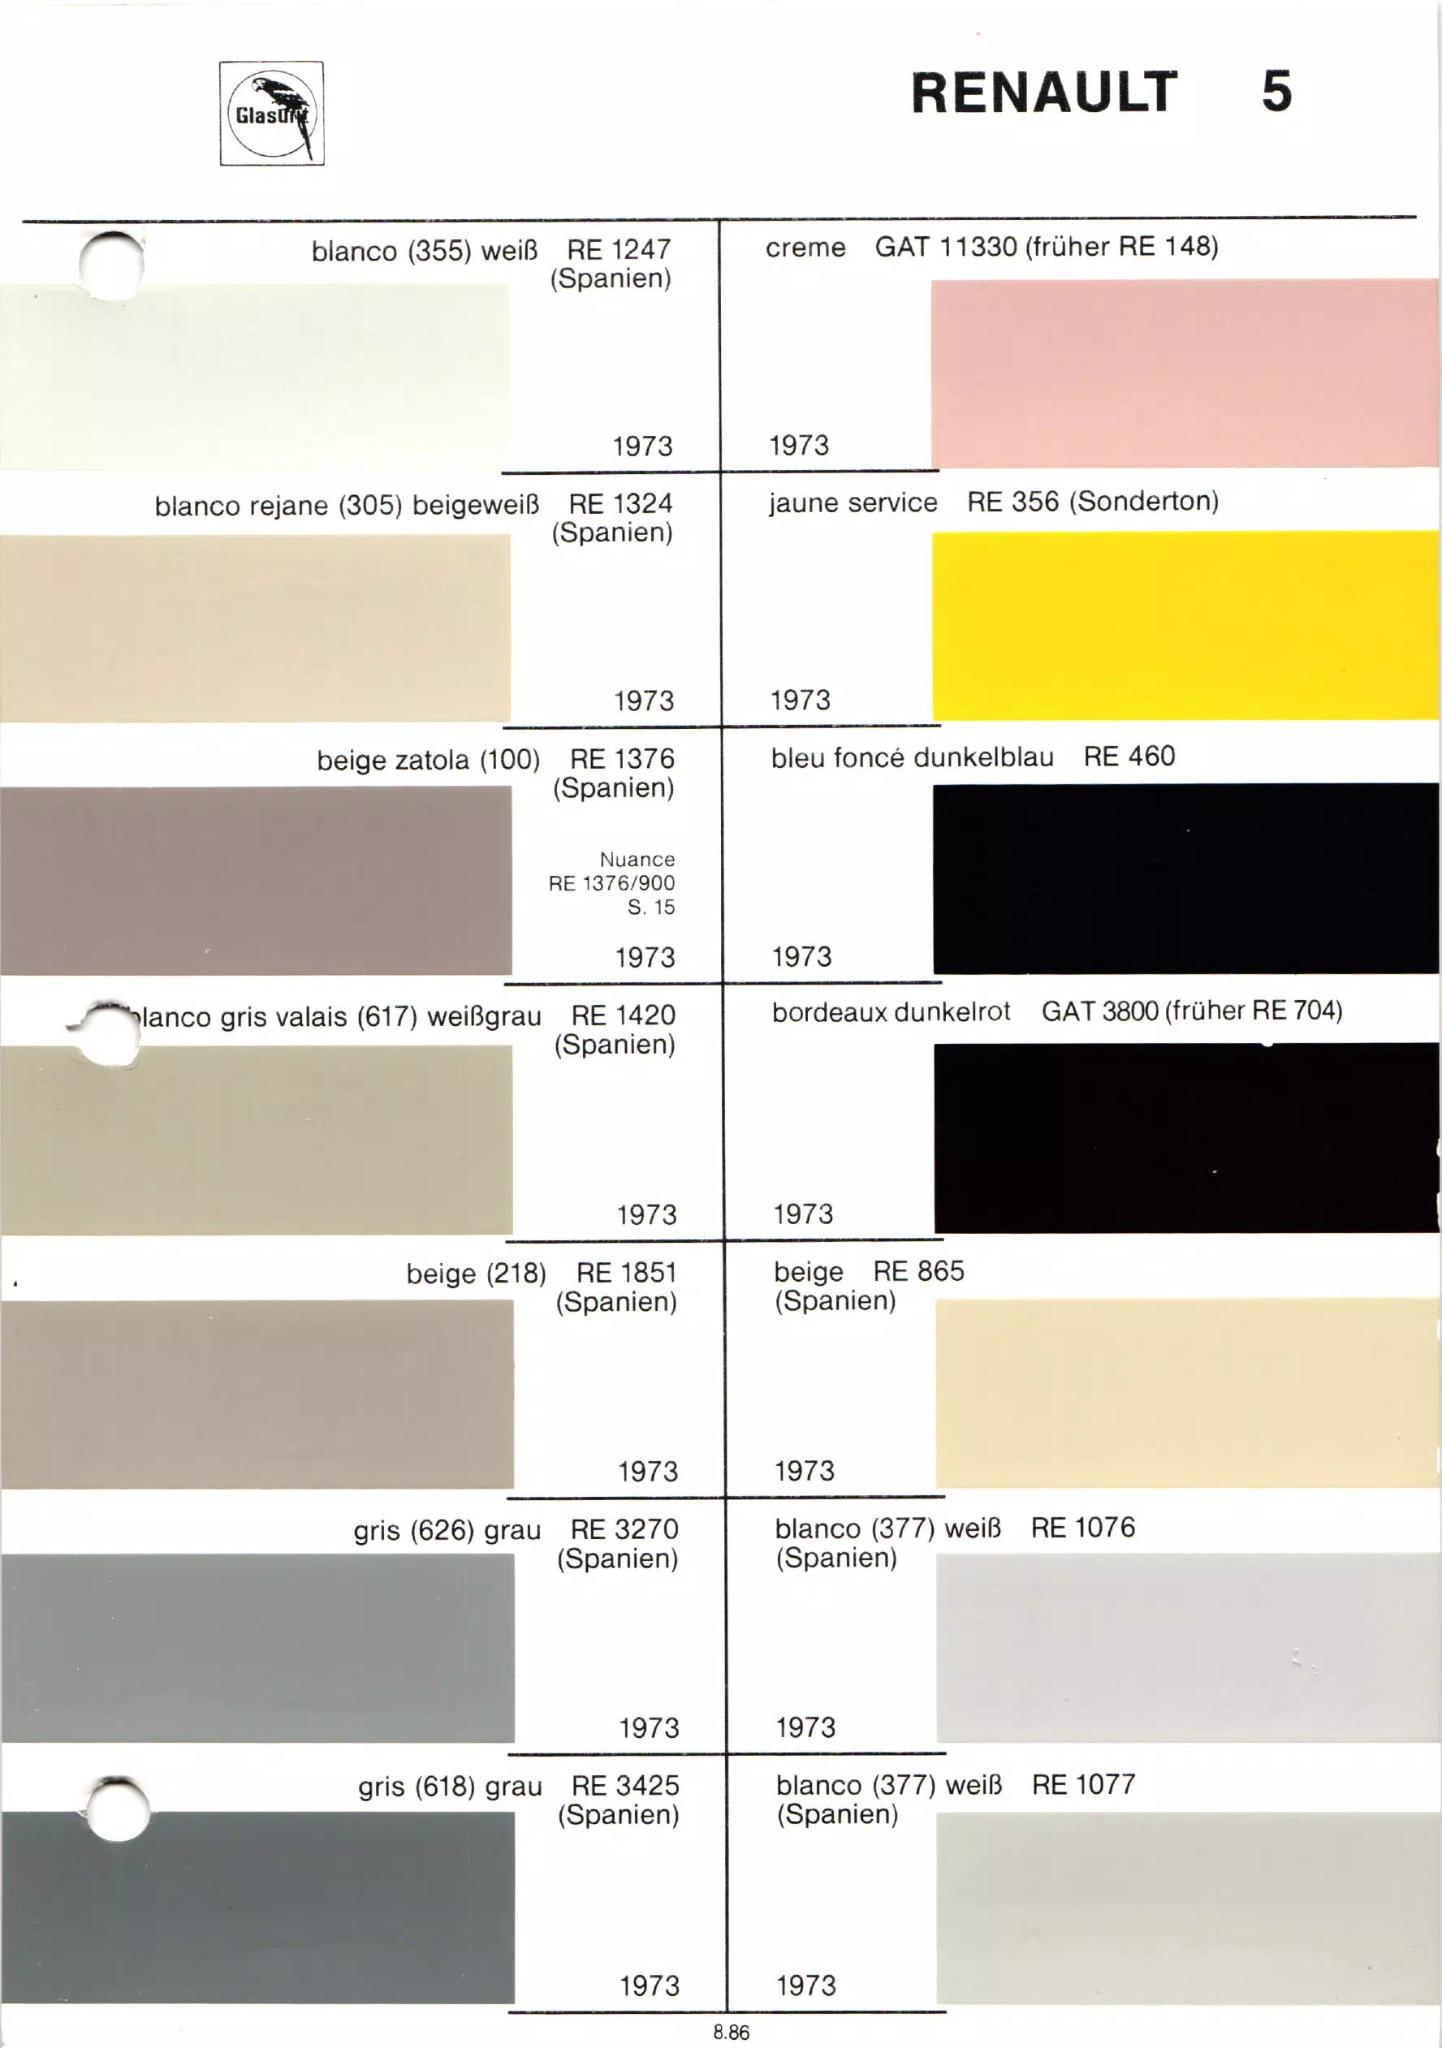 different paint swatches from exterior Renault Automobiles with their paint number, year, and color name.